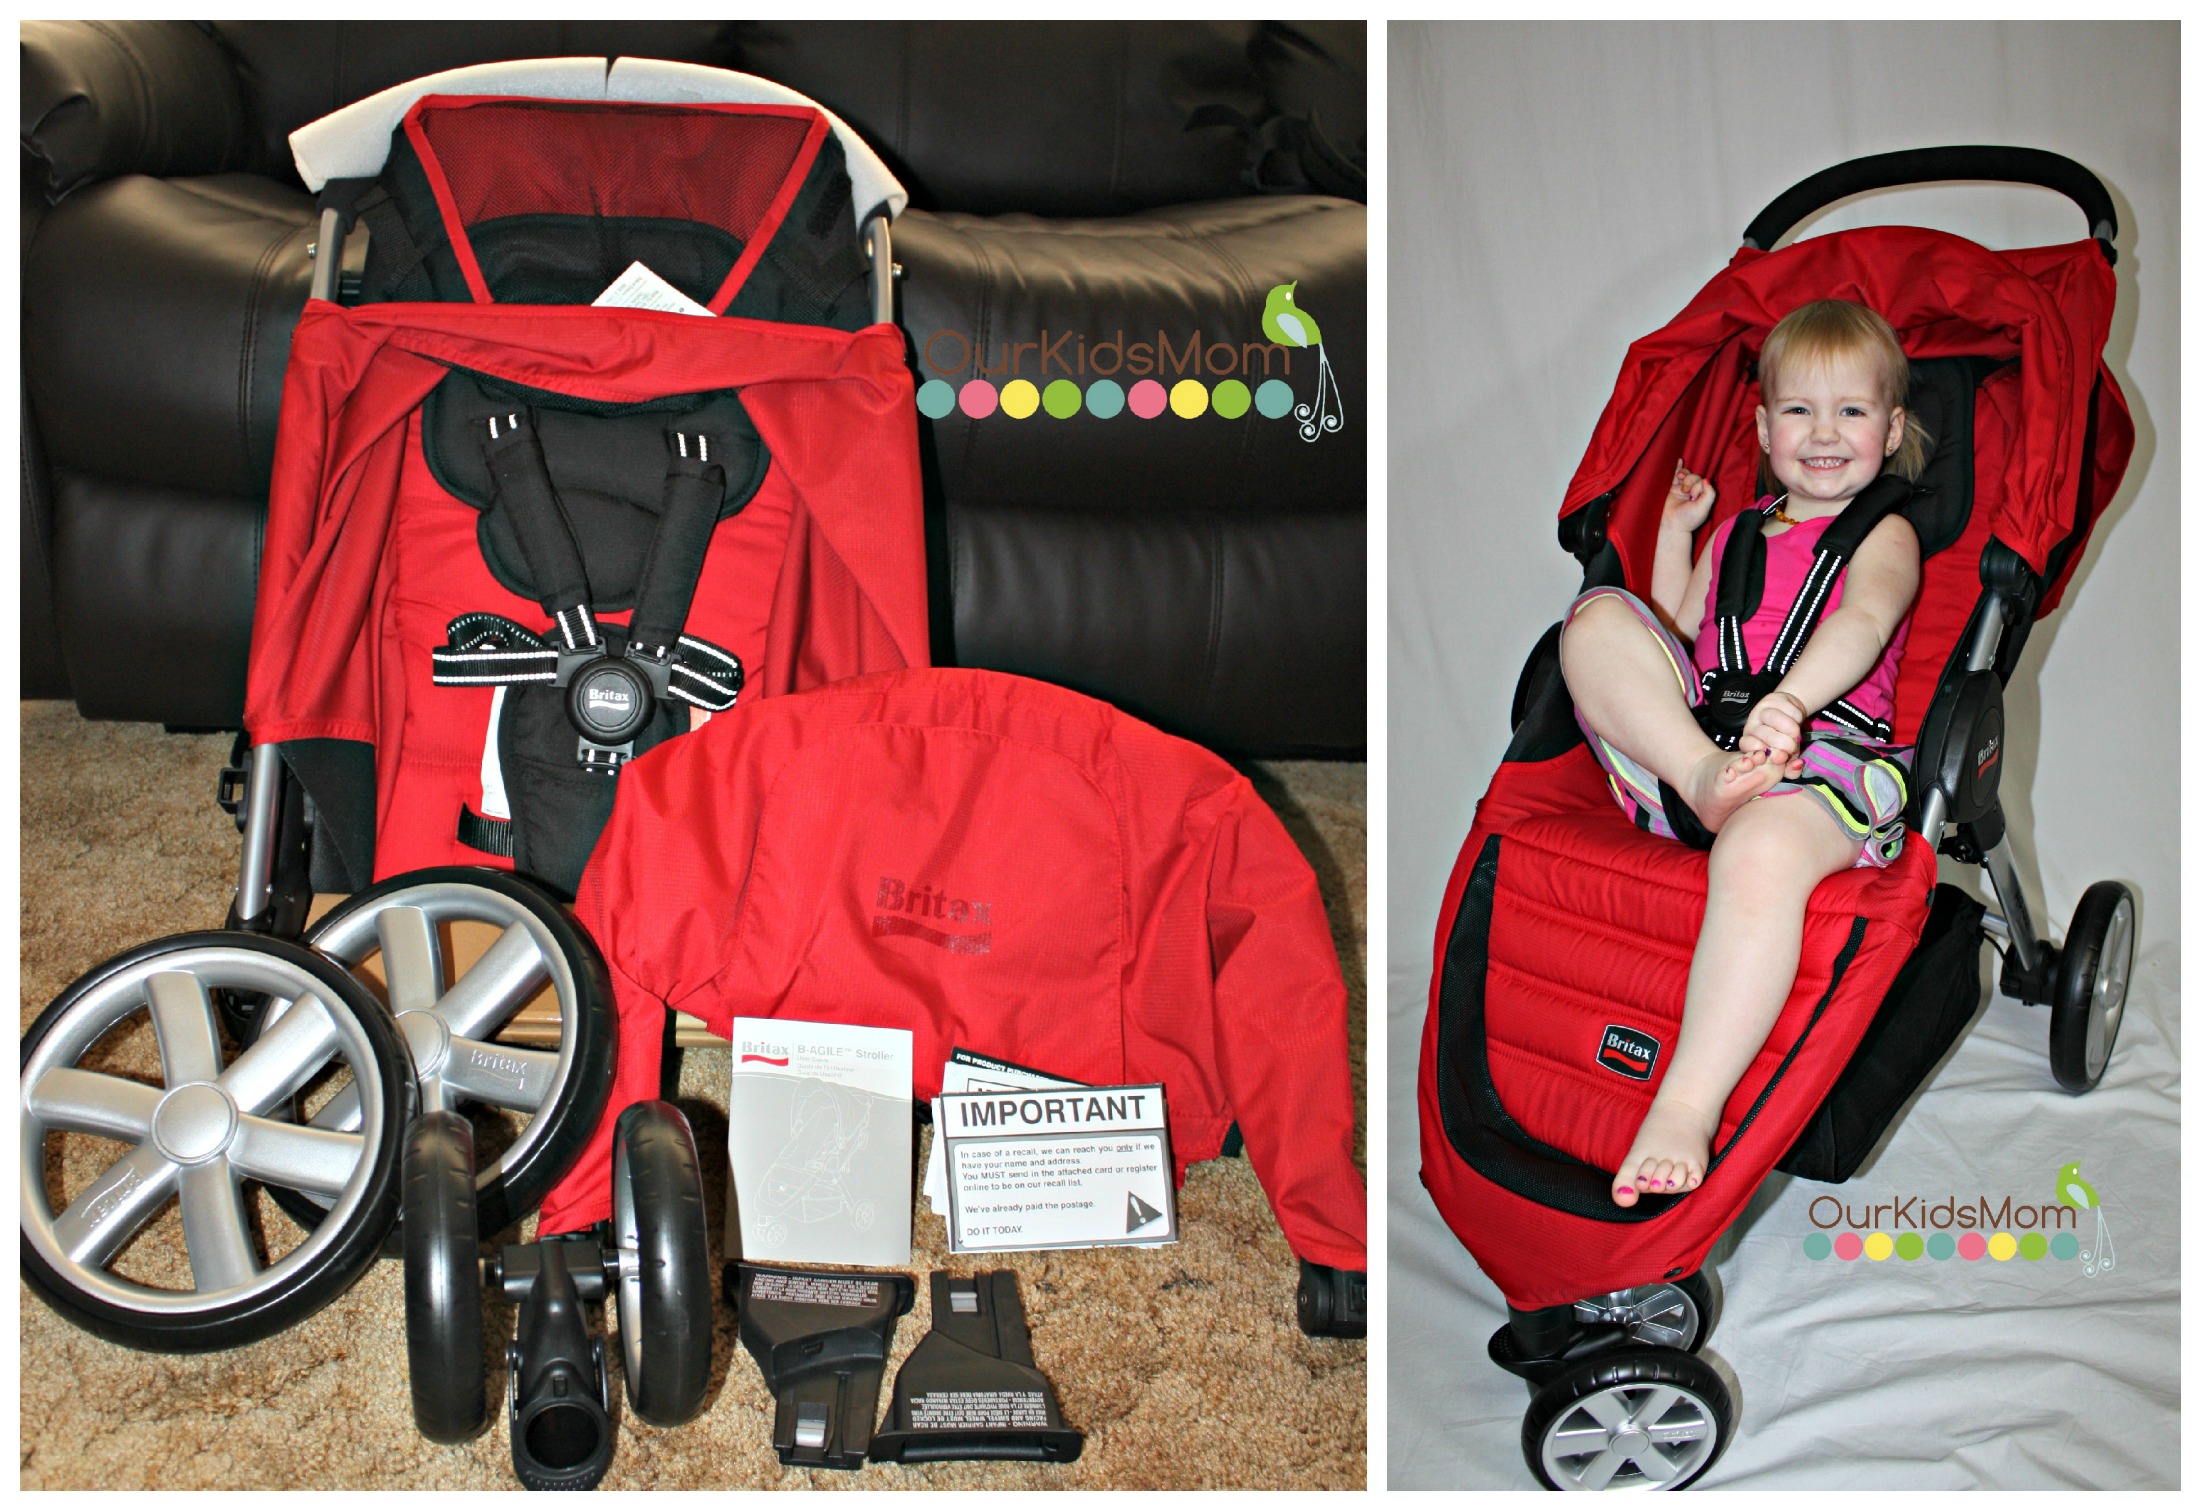 when can baby sit in britax stroller without car seat